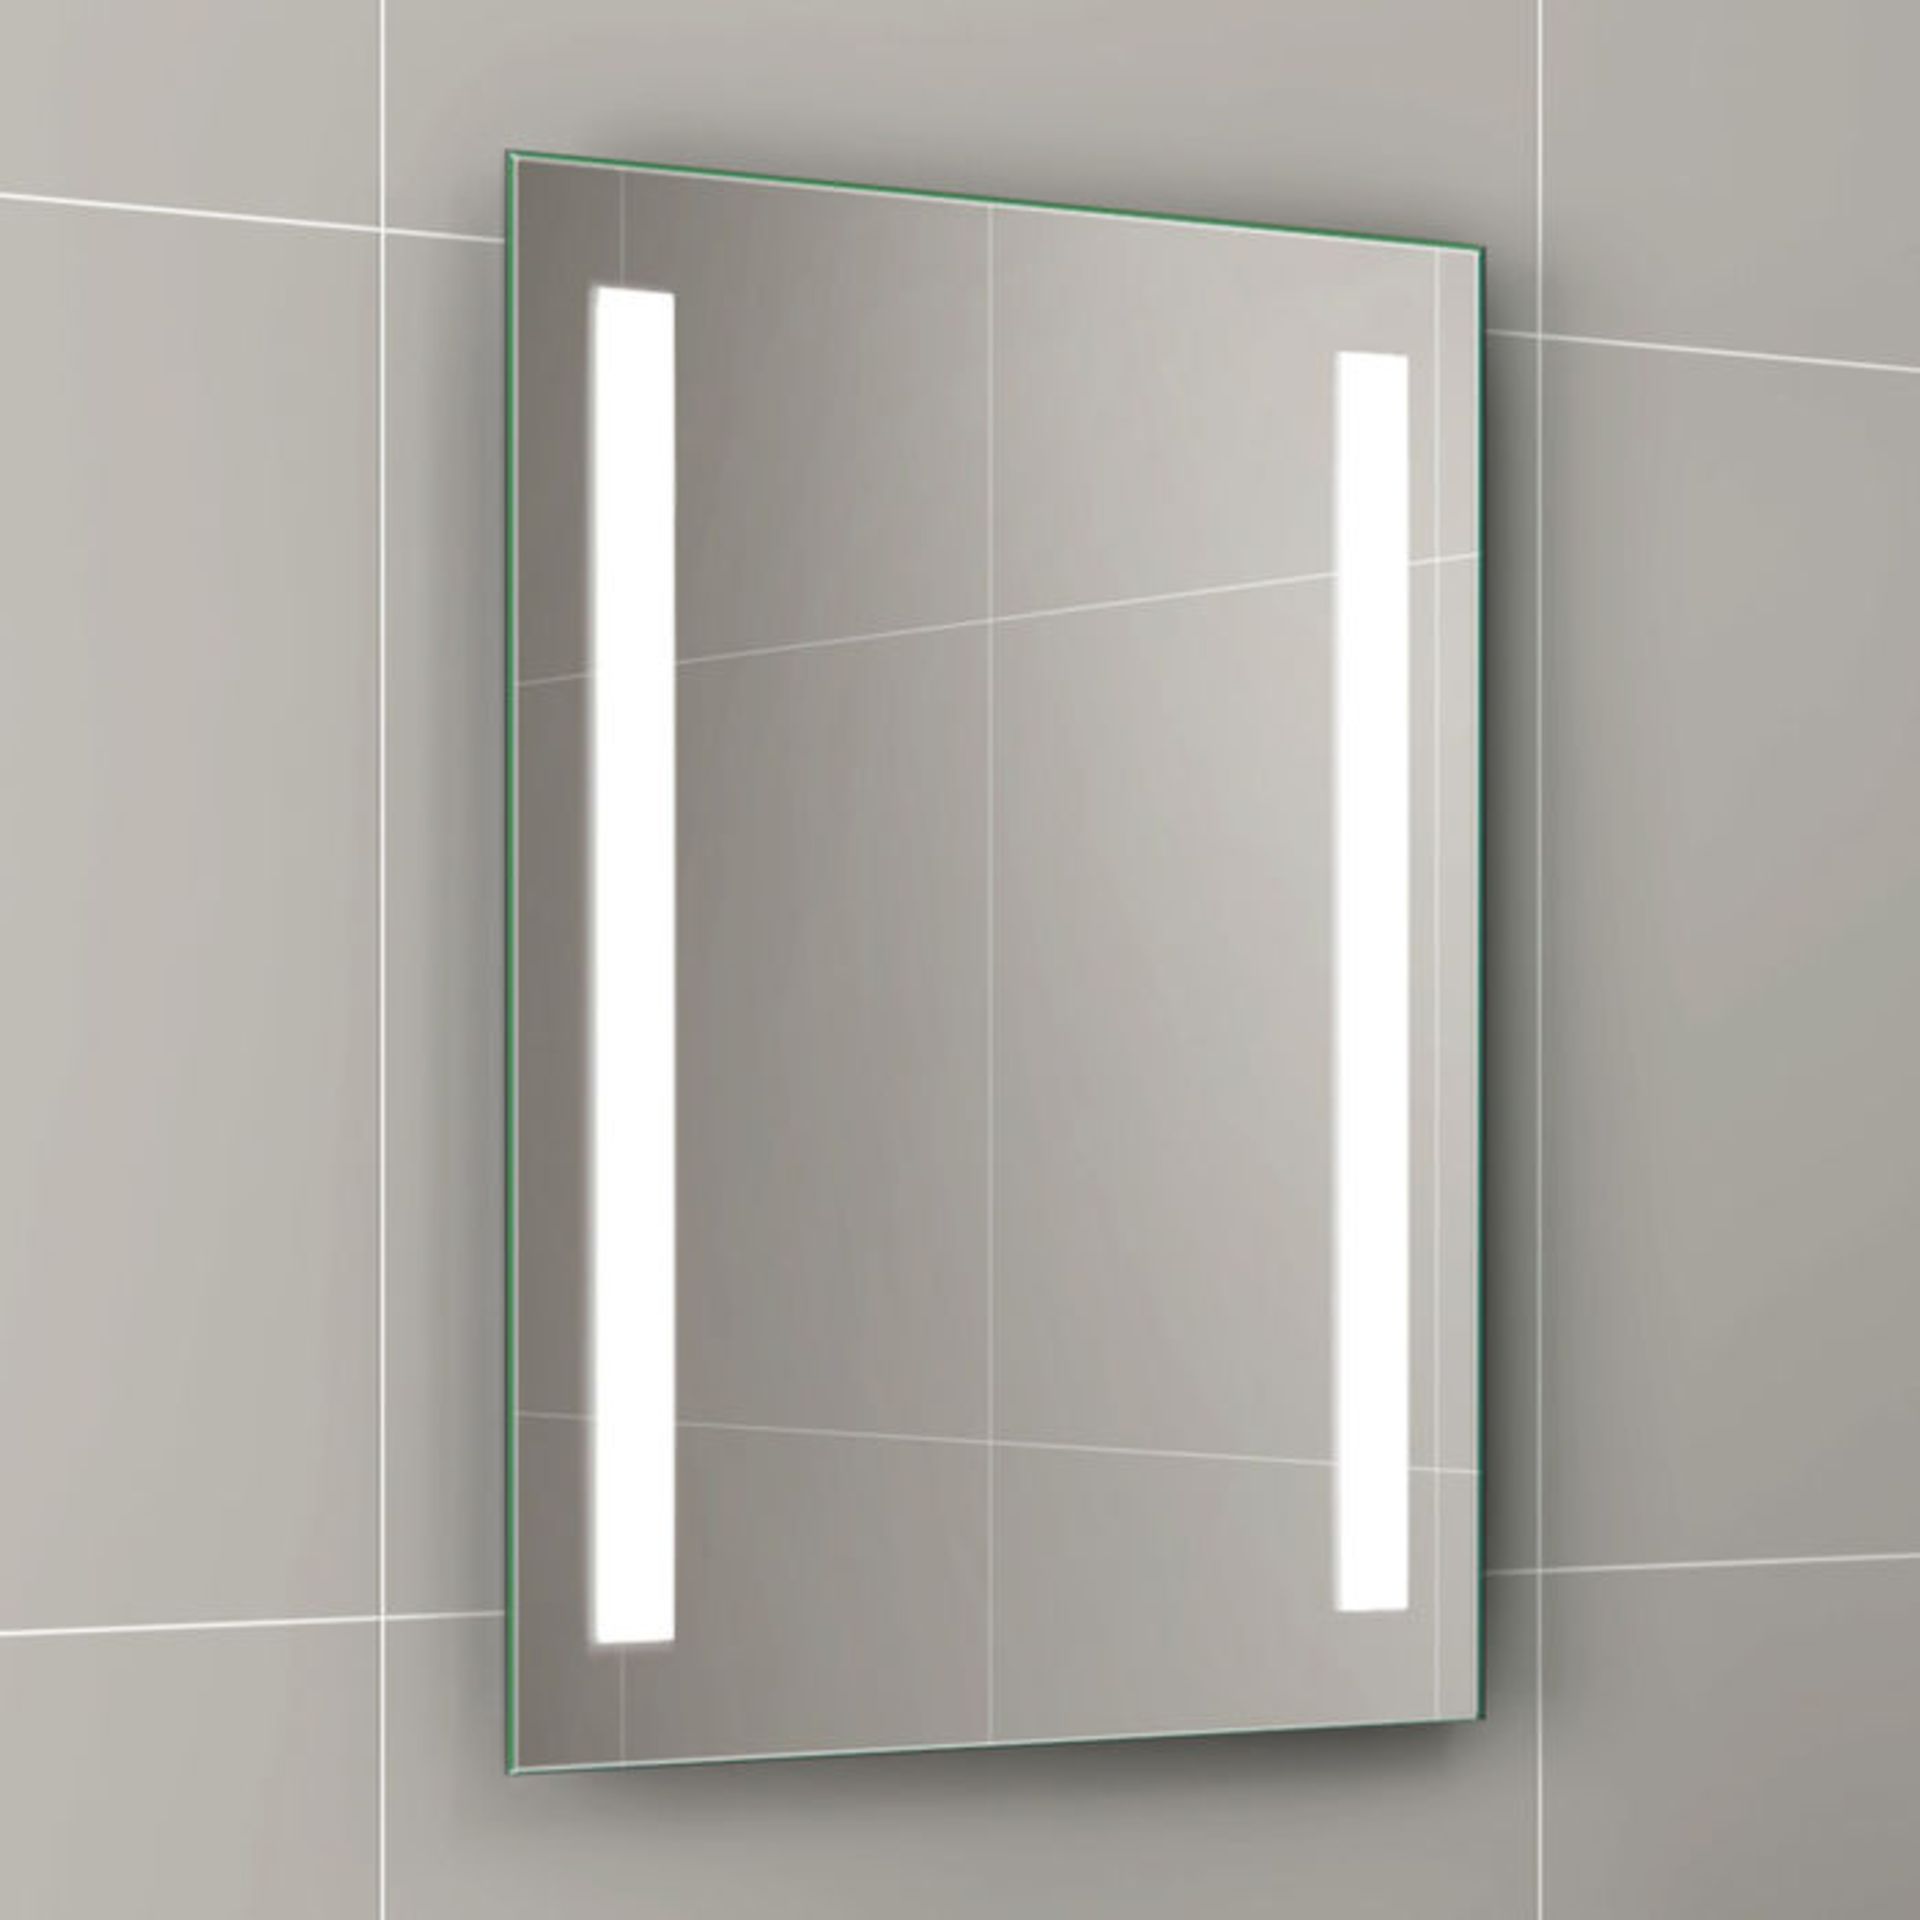 (V155) 500x700mm Omega LED Mirror - Battery Operated. Energy saving controlled On / Off switch - Image 2 of 3